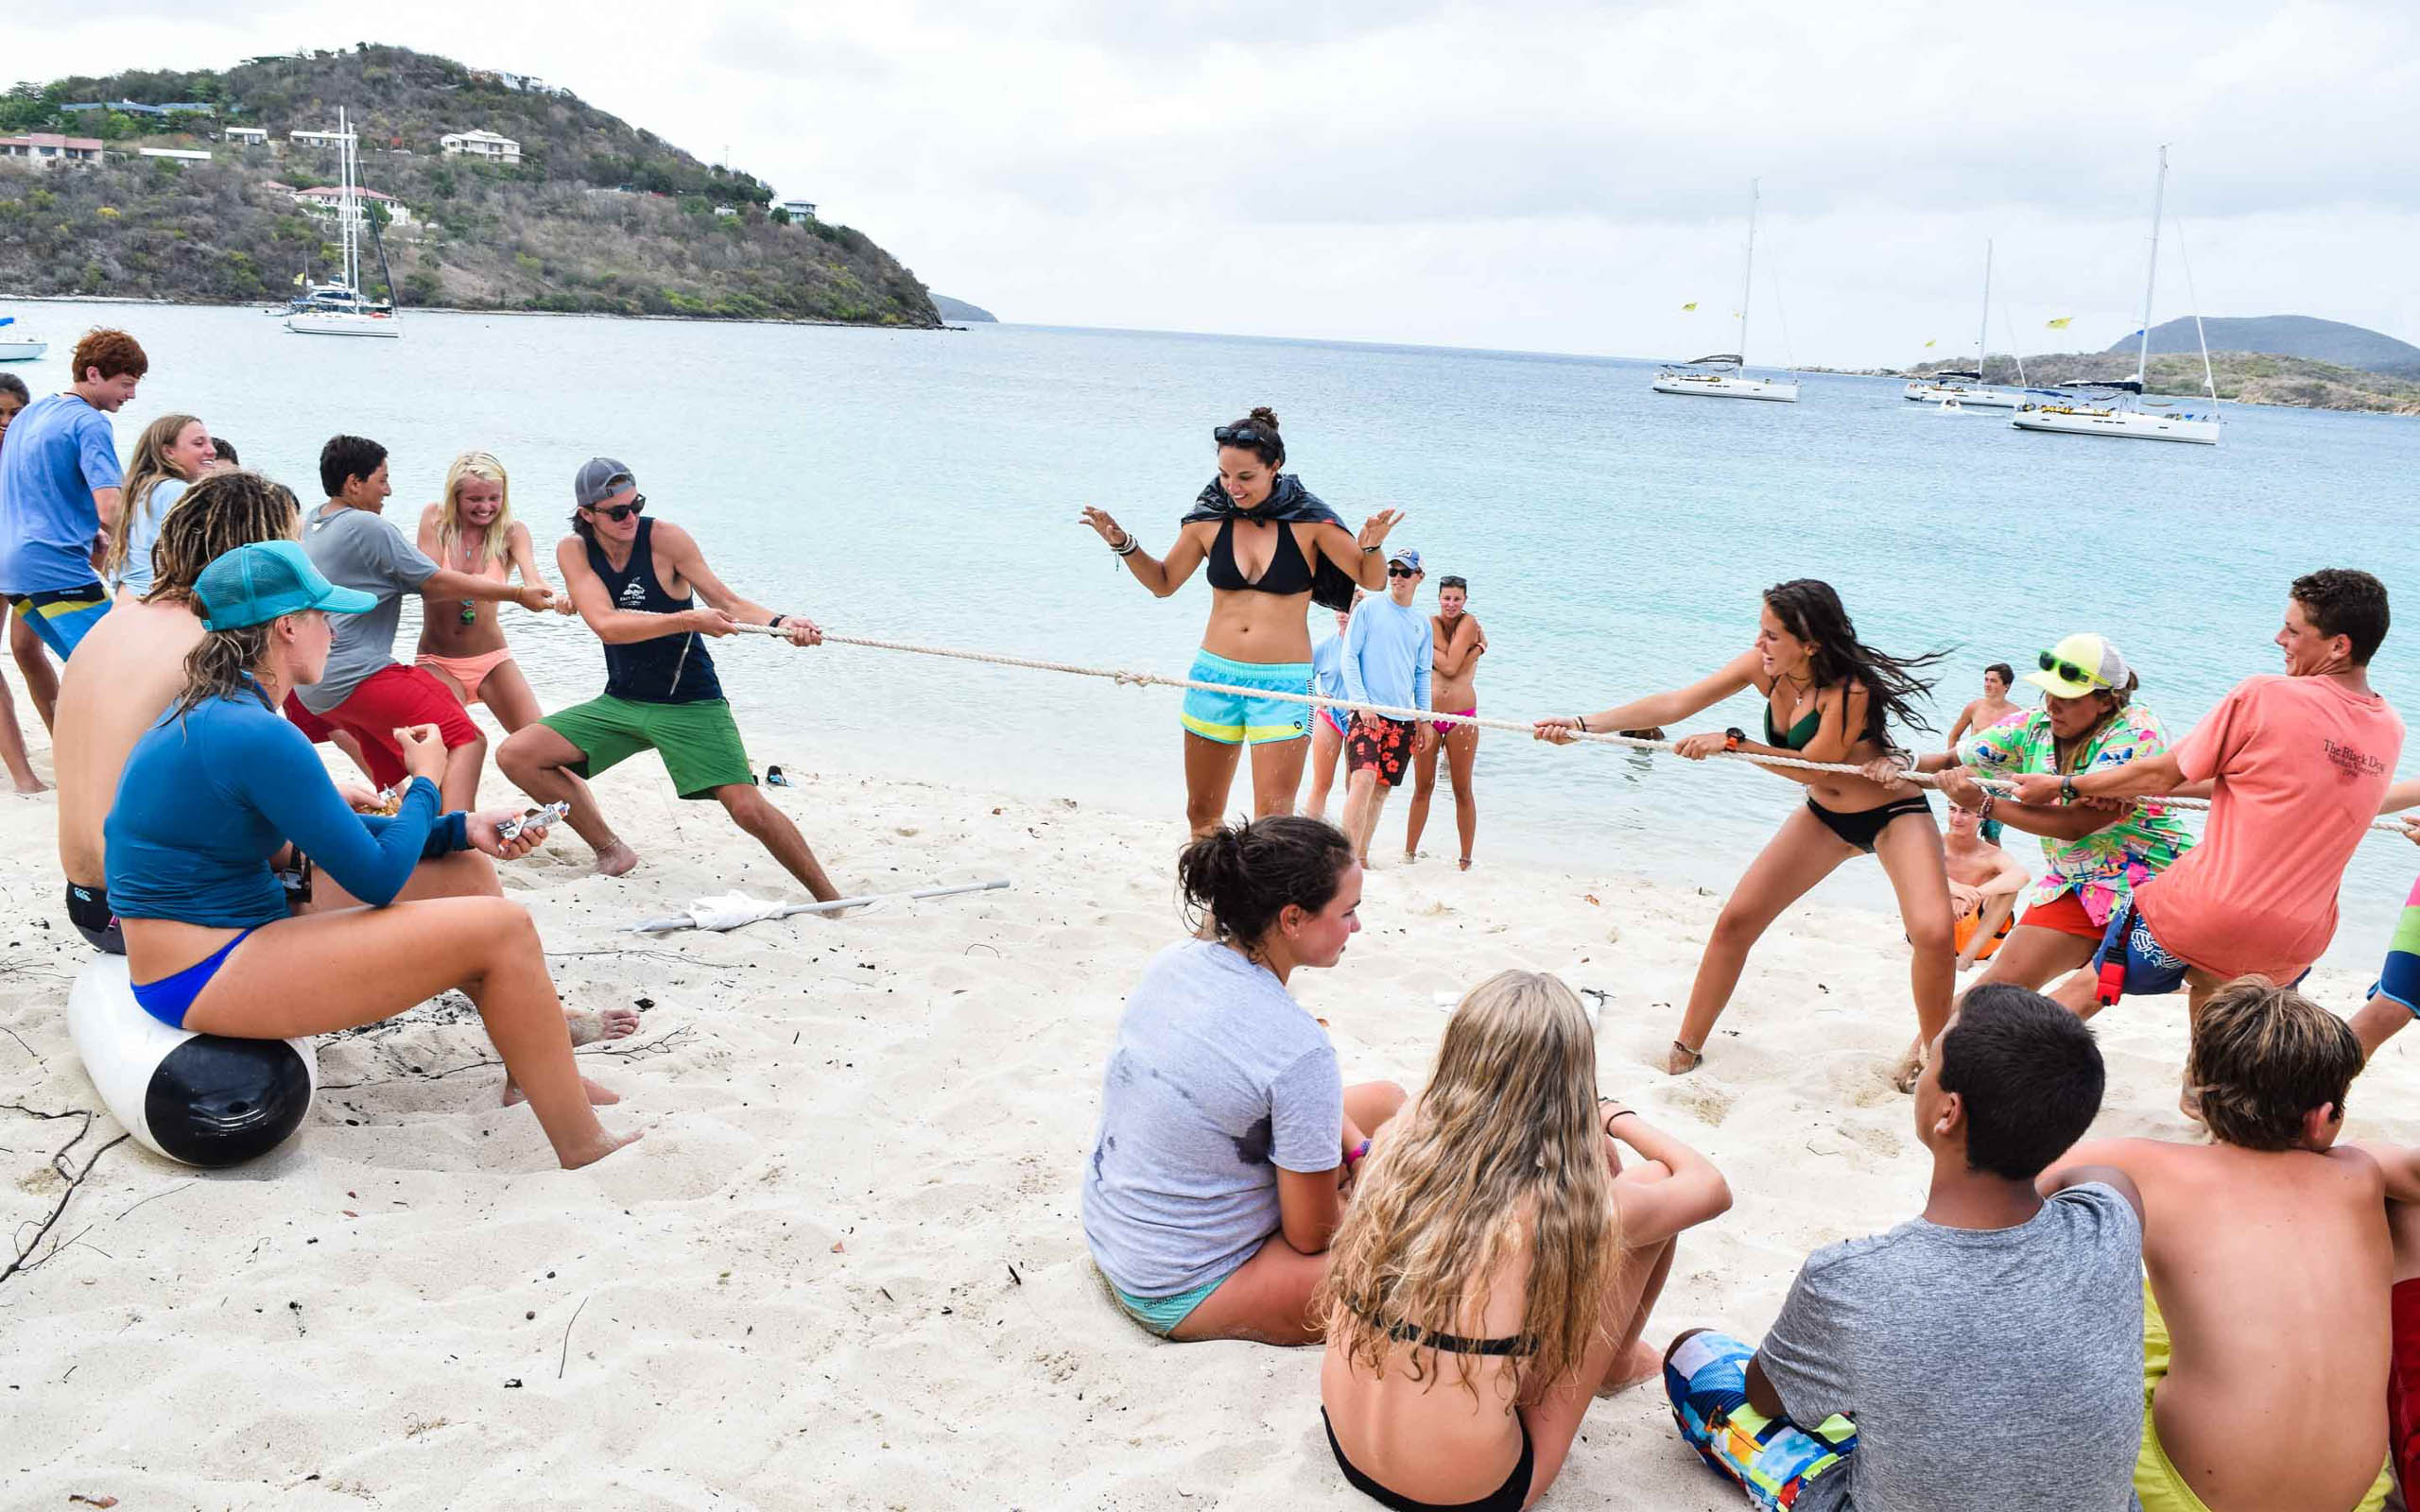 A group of people playing tug of war on the beach.